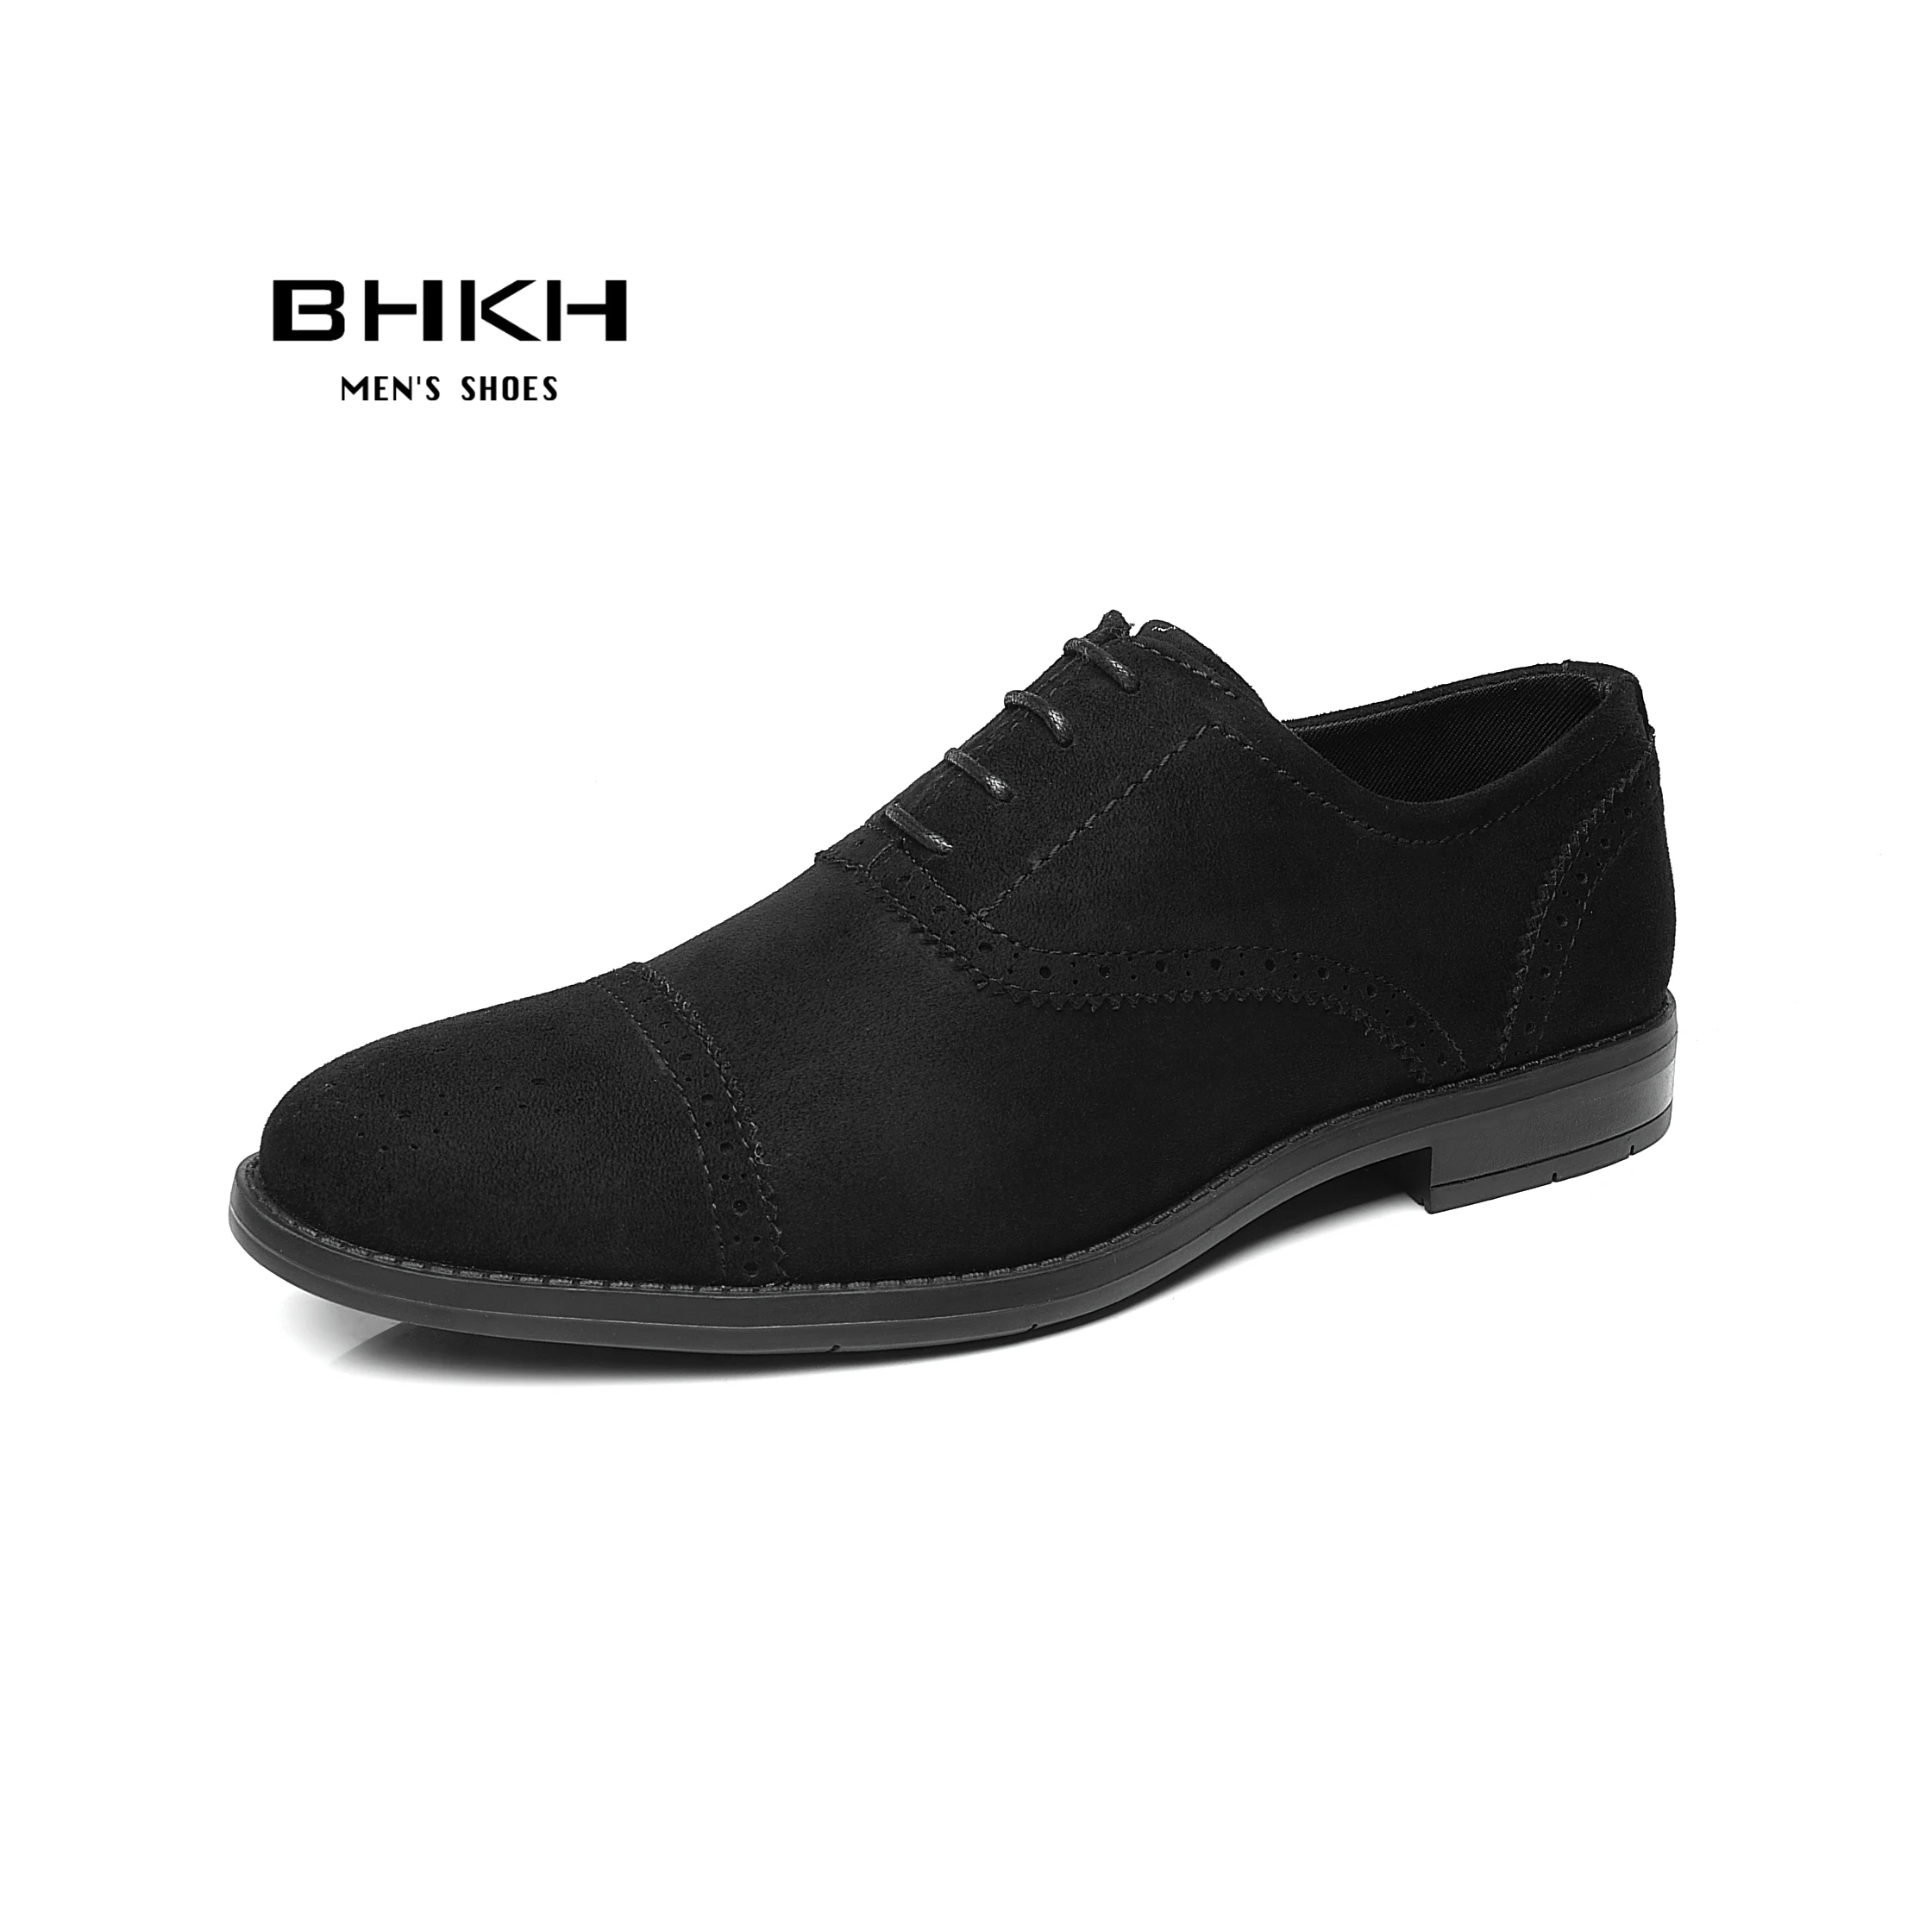 Men Dress Shoes New Fashion Formal Shoes Man Wedding Party Office Footwe... - $69.77